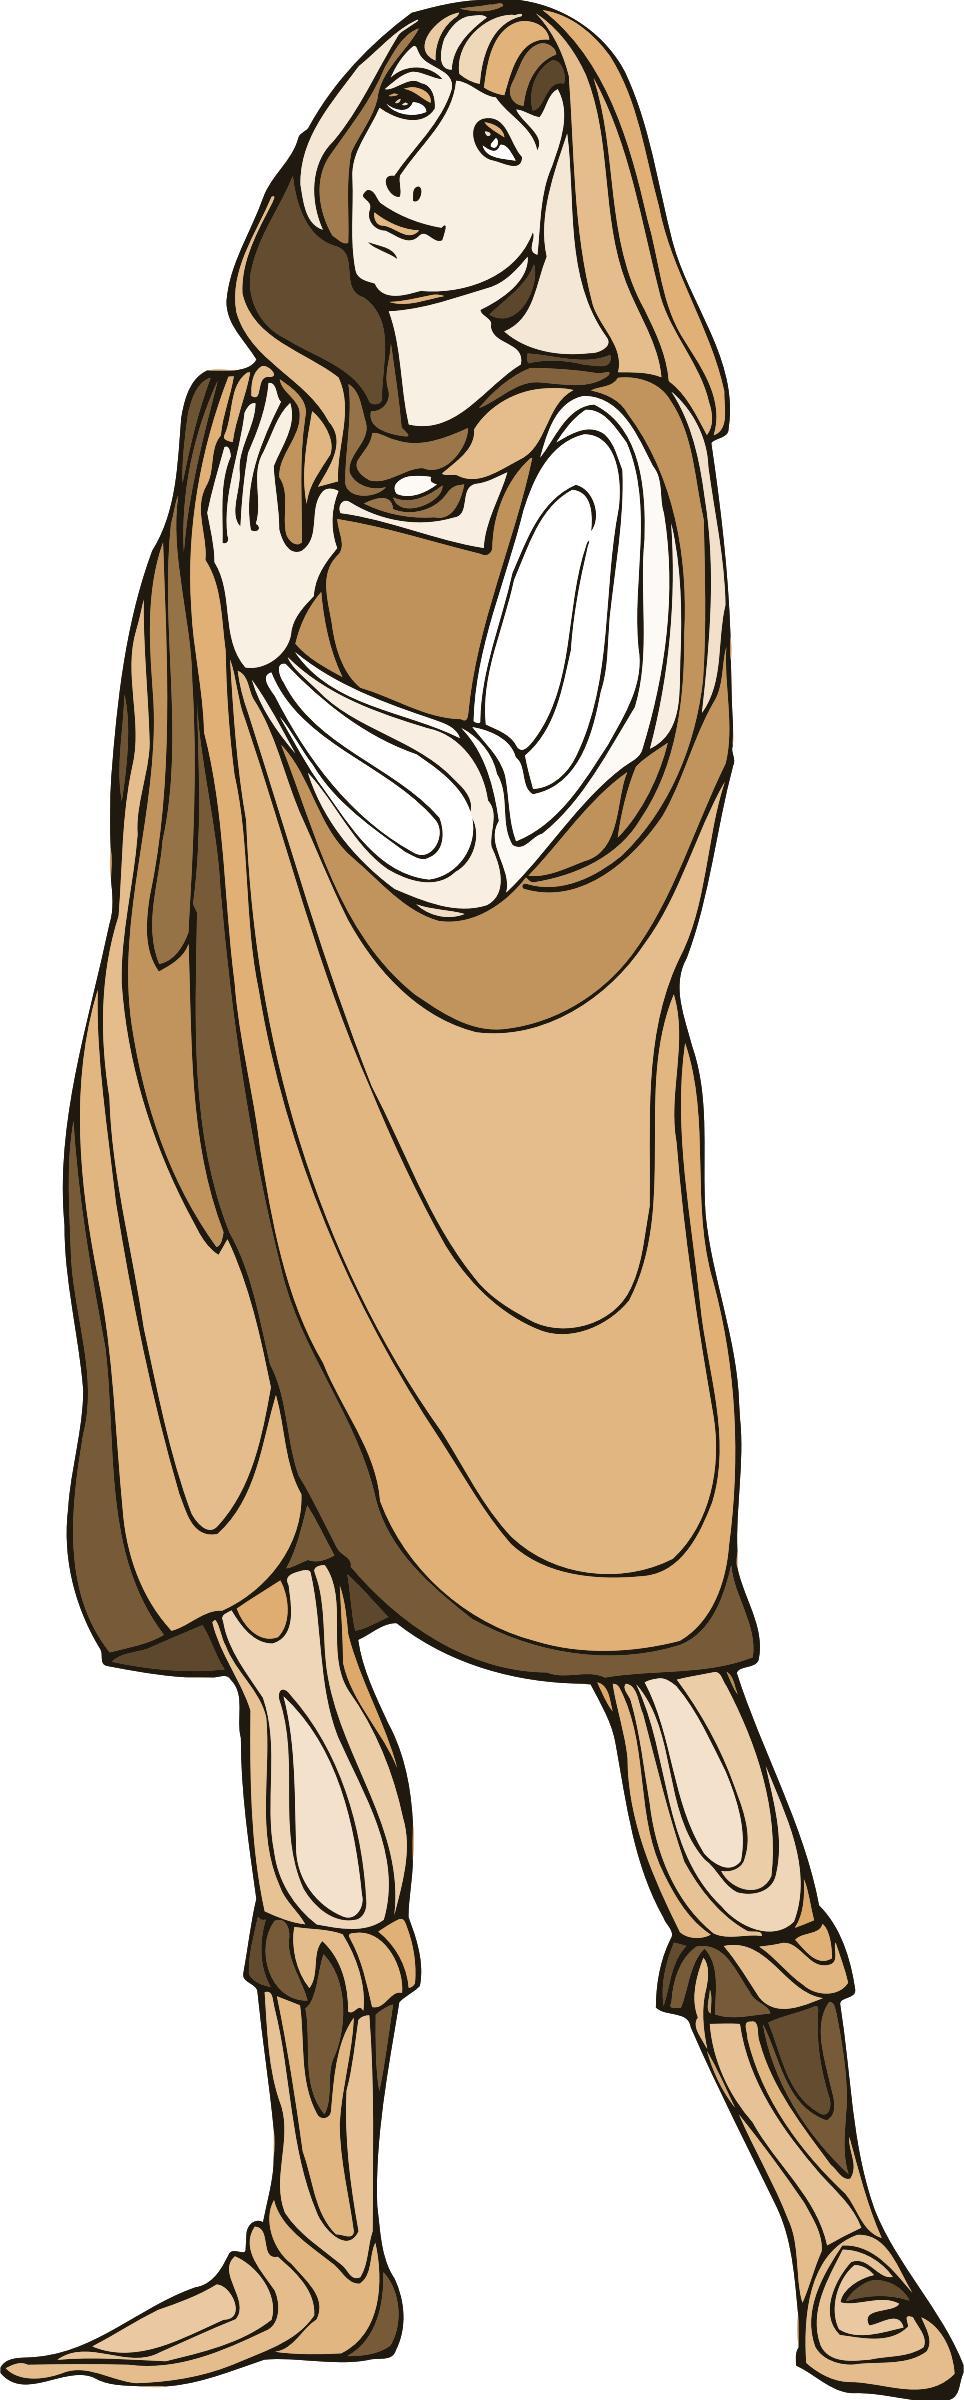 Shakespeare characters - Romeo png transparent